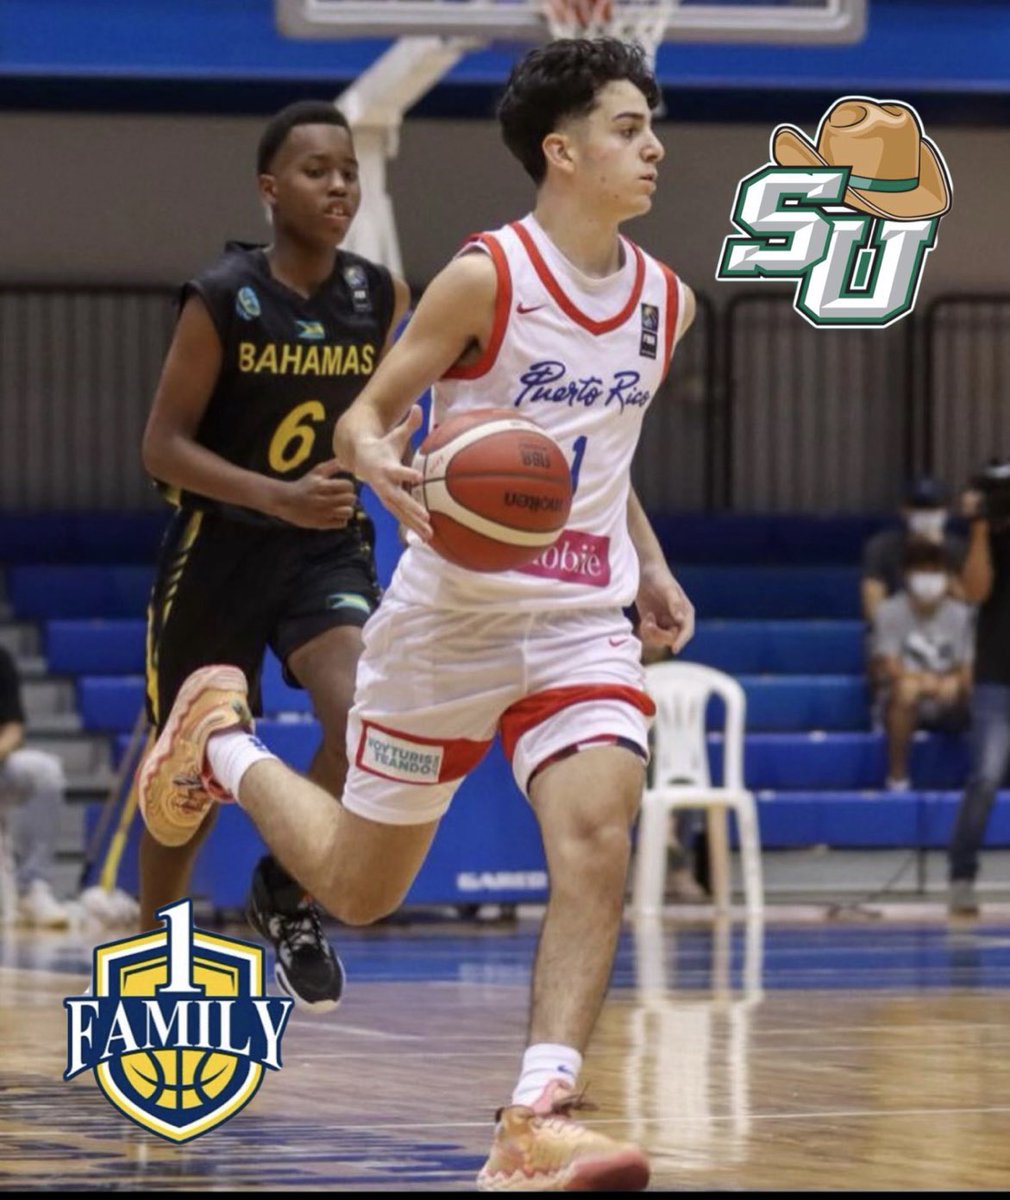 2027 6’2 PG @_Gustavo_Roca earned his first offer from Stetson! Kid is special!!!